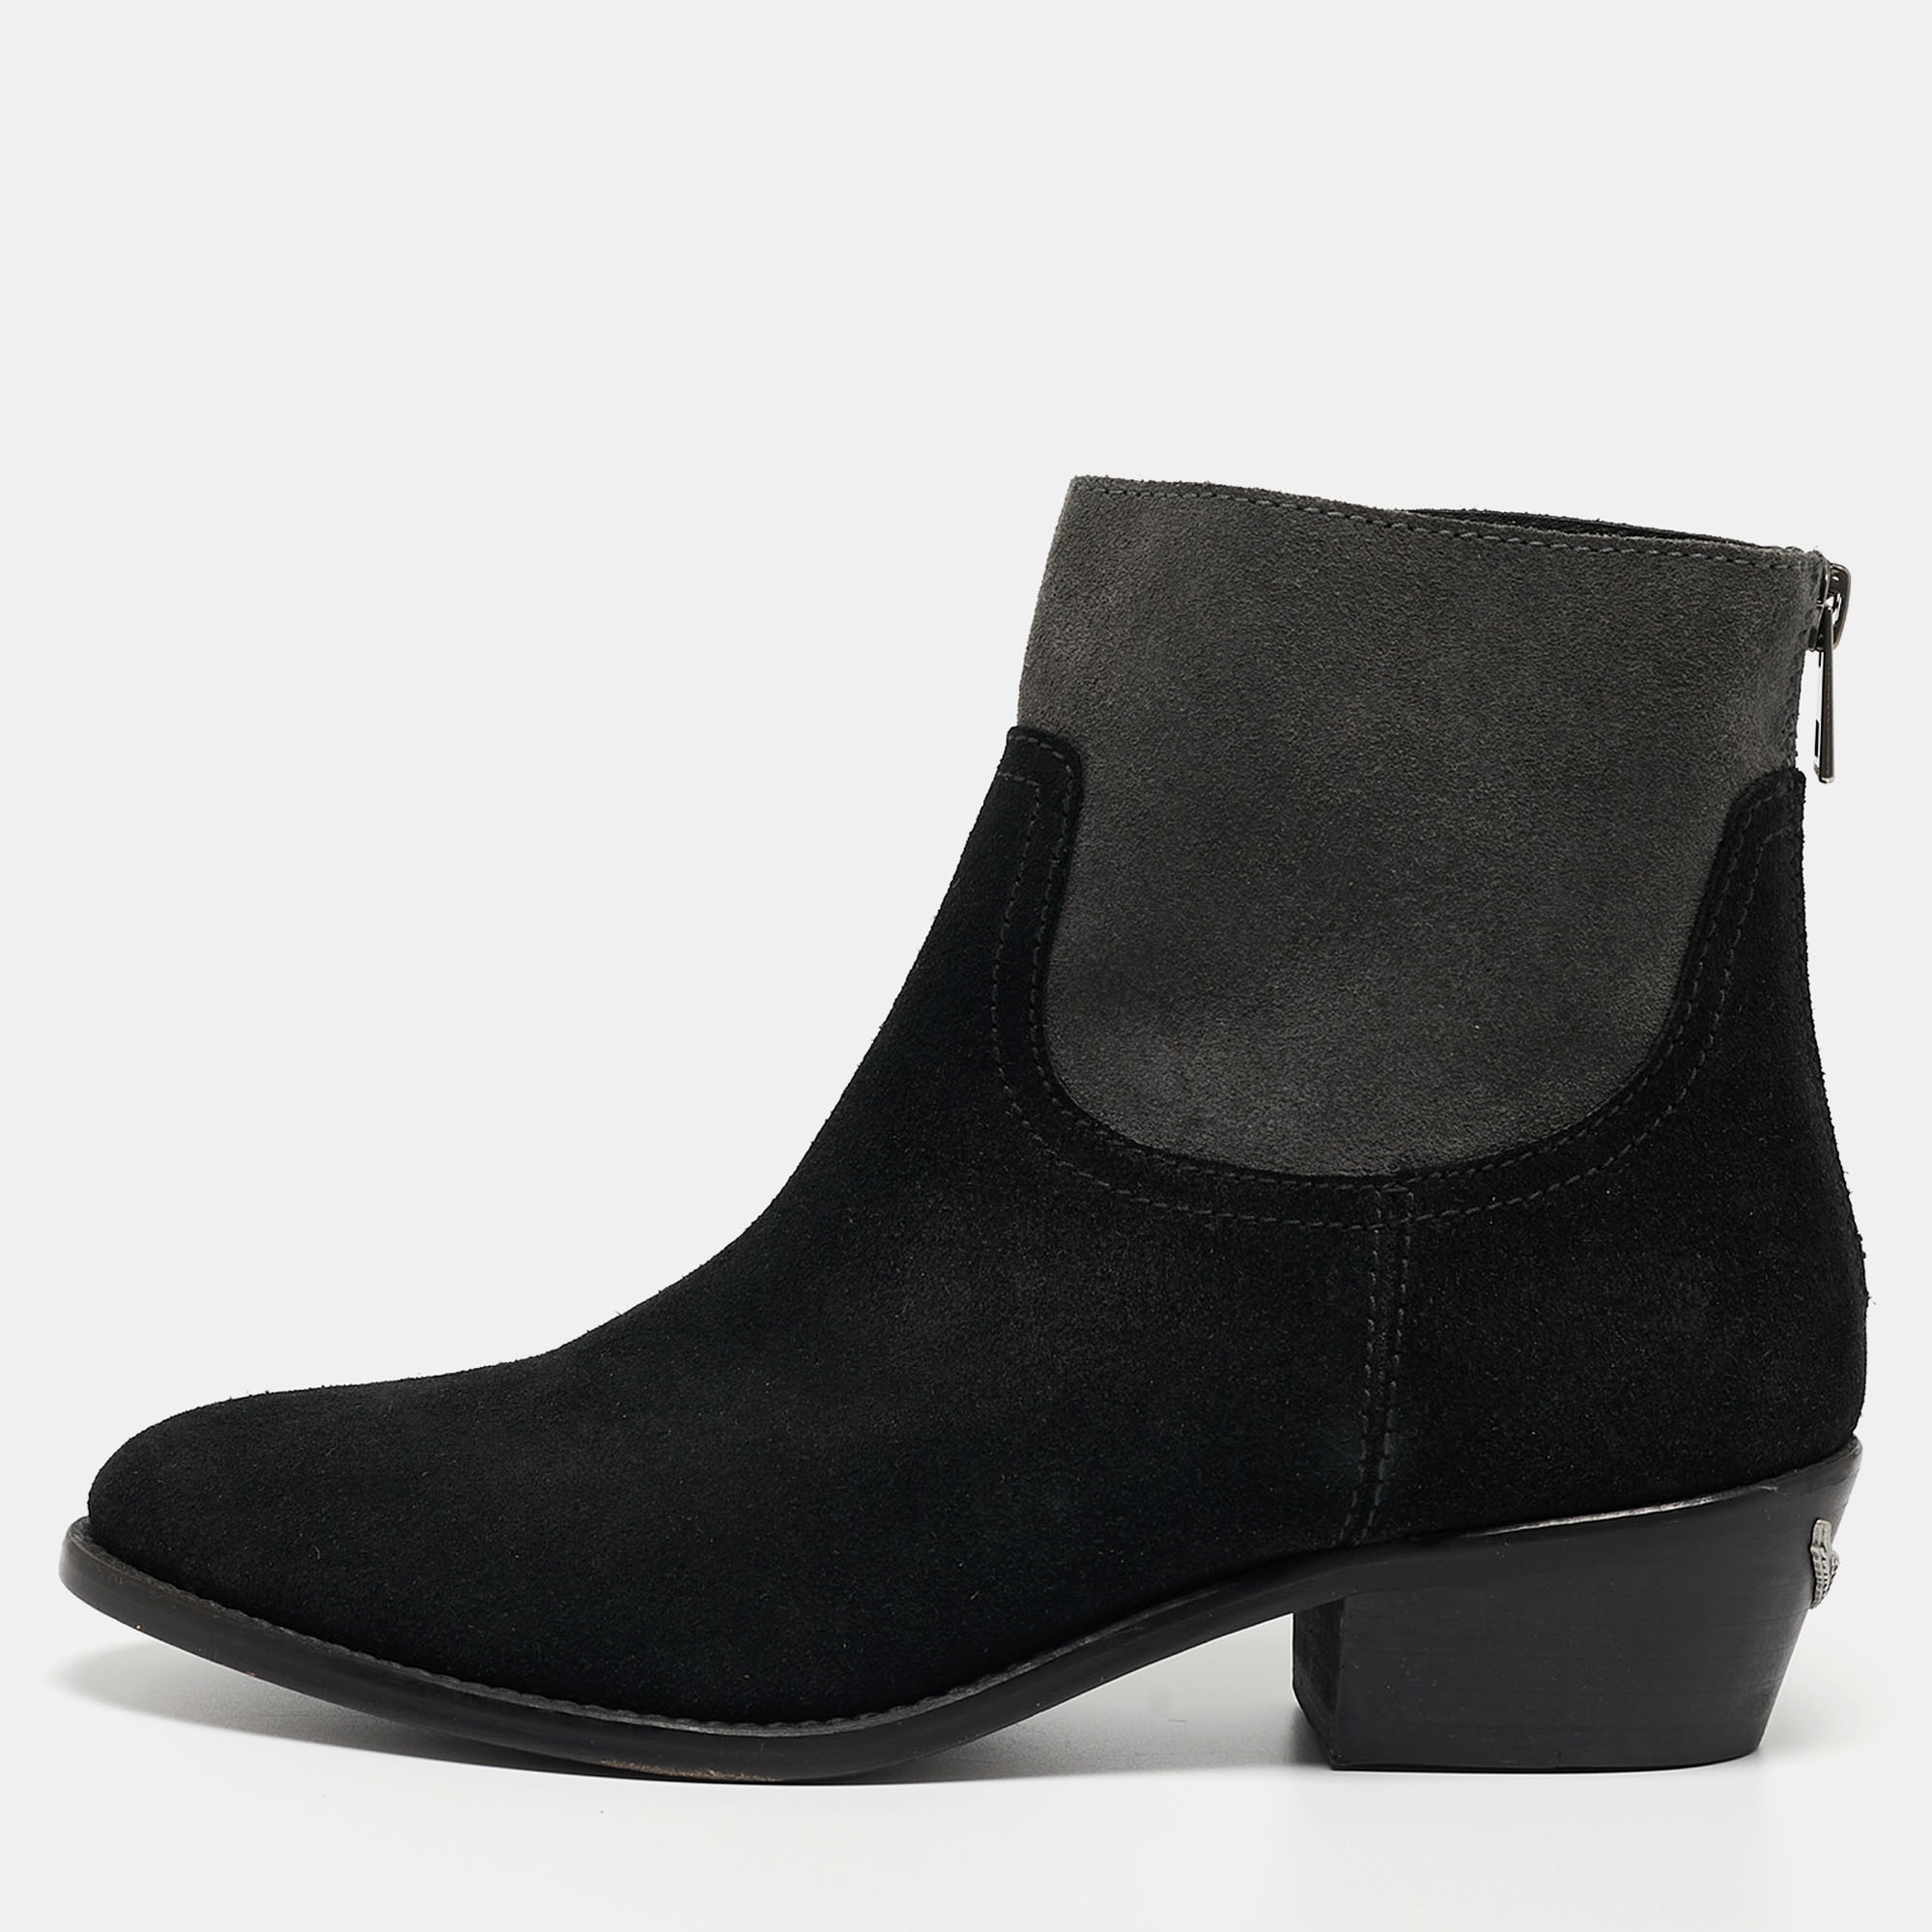 Zadig & voltaire black/grey suede teddy ankle boots size 37